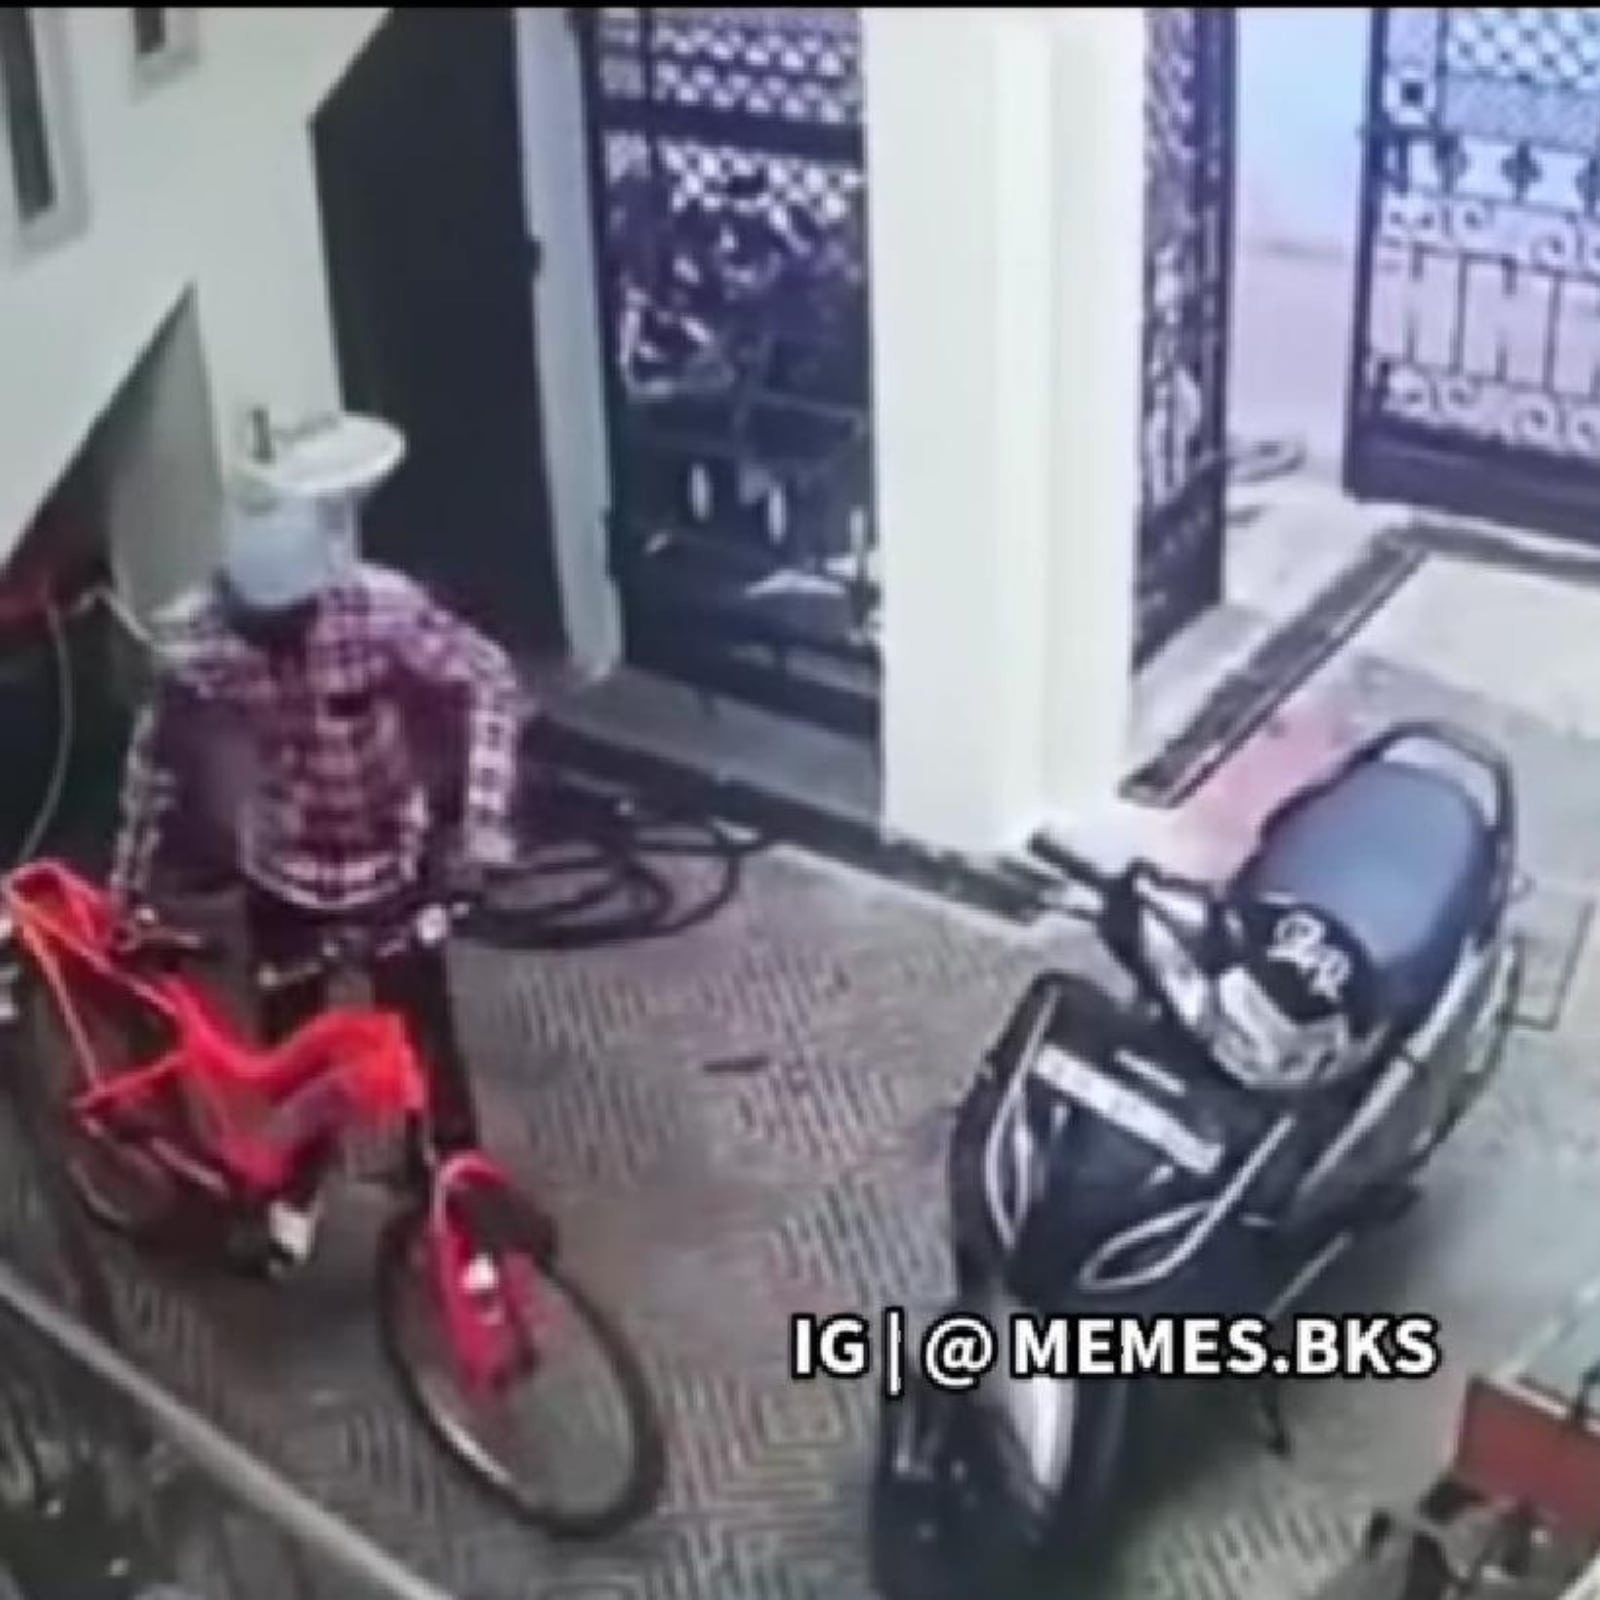 Desi Man Walks into House to Steal Cycle, What Happens Next Leaves Netizens in Splits